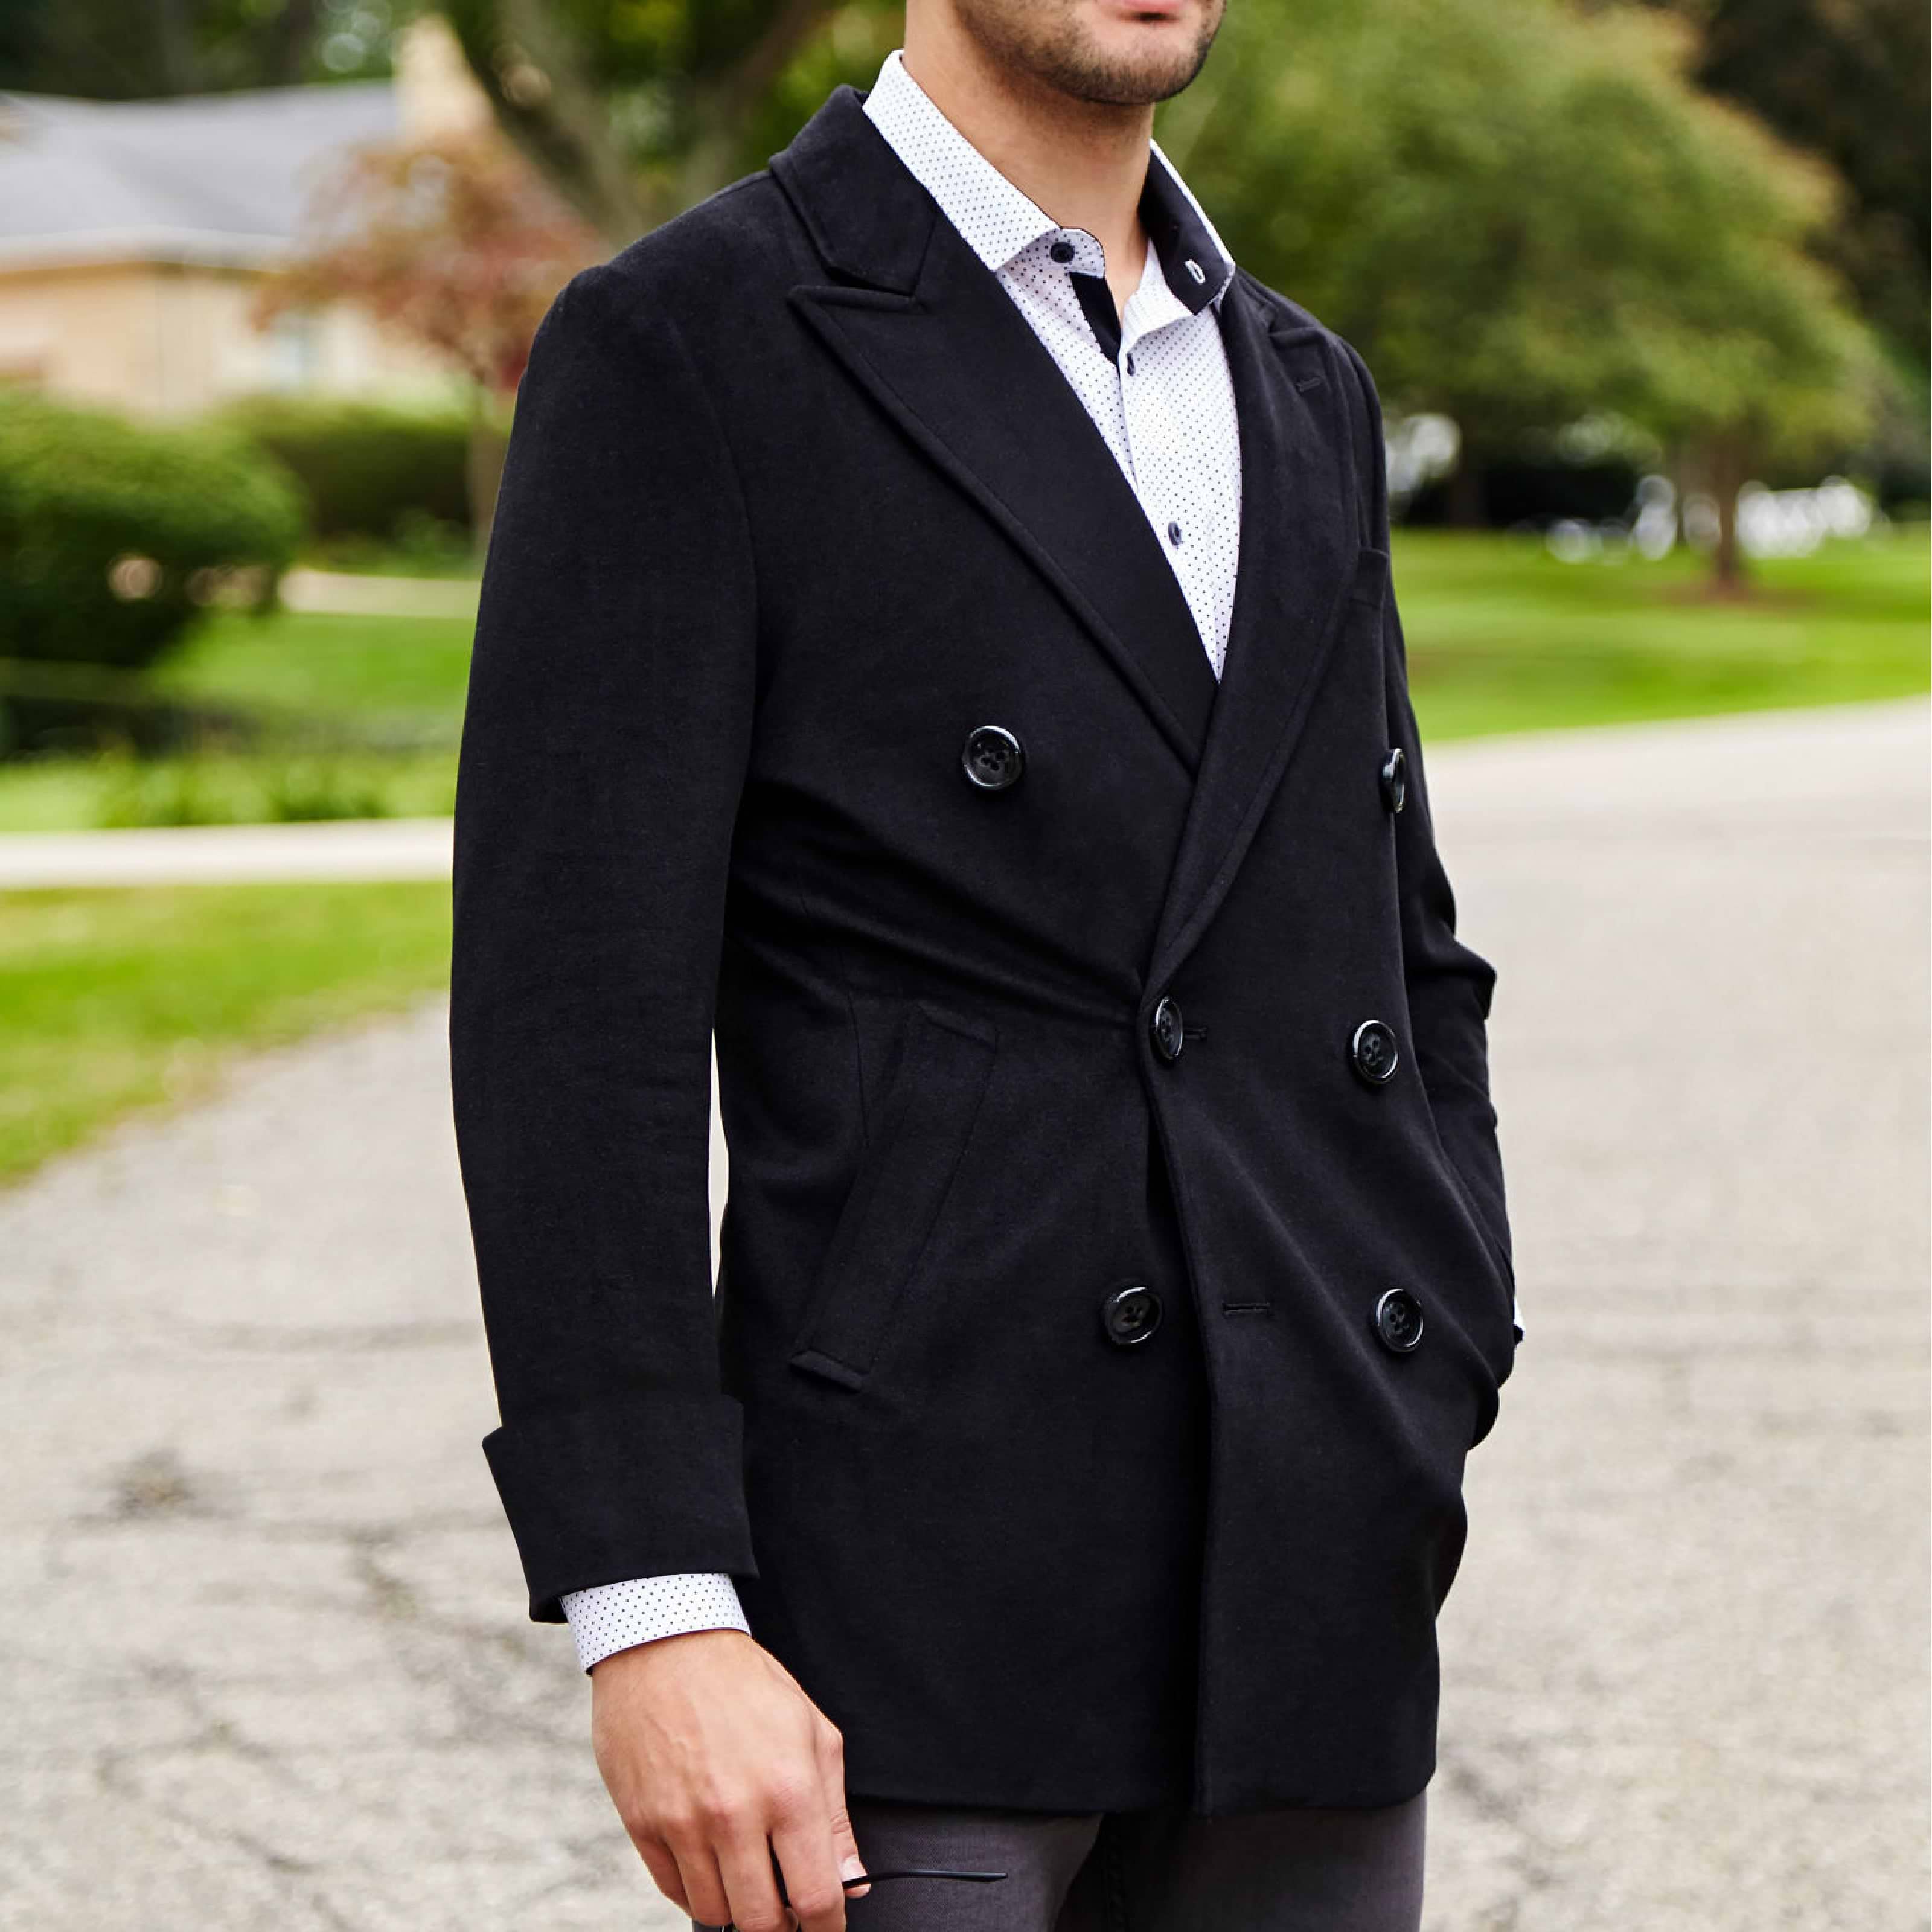 Solid Black Double-Breasted Overcoat